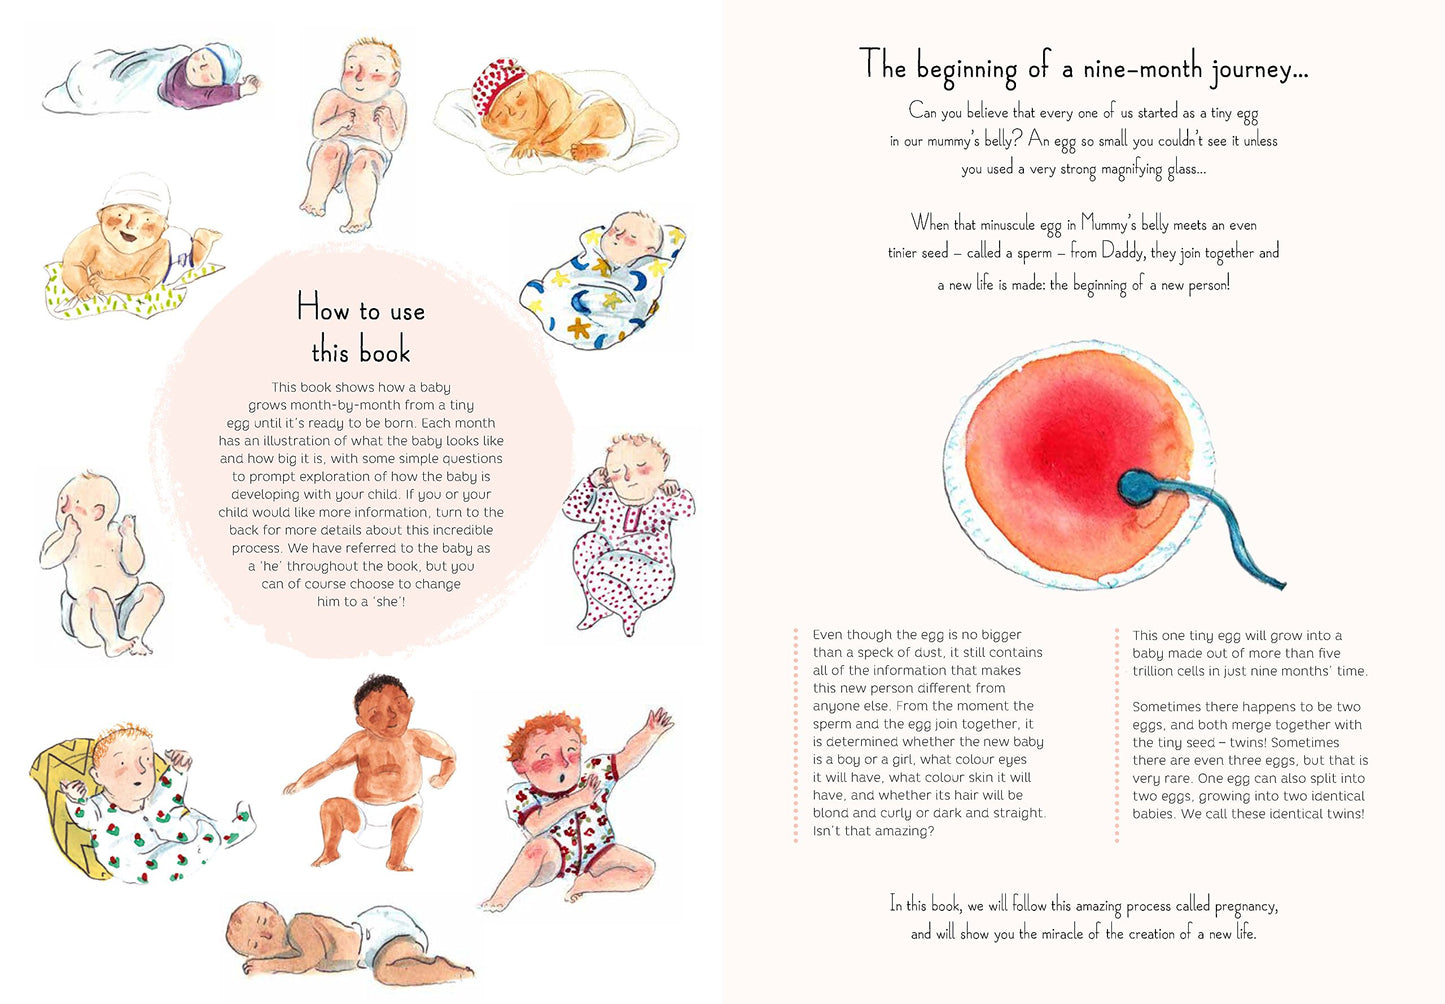 9 Months: A month by month guide to pregnancy for the family to share